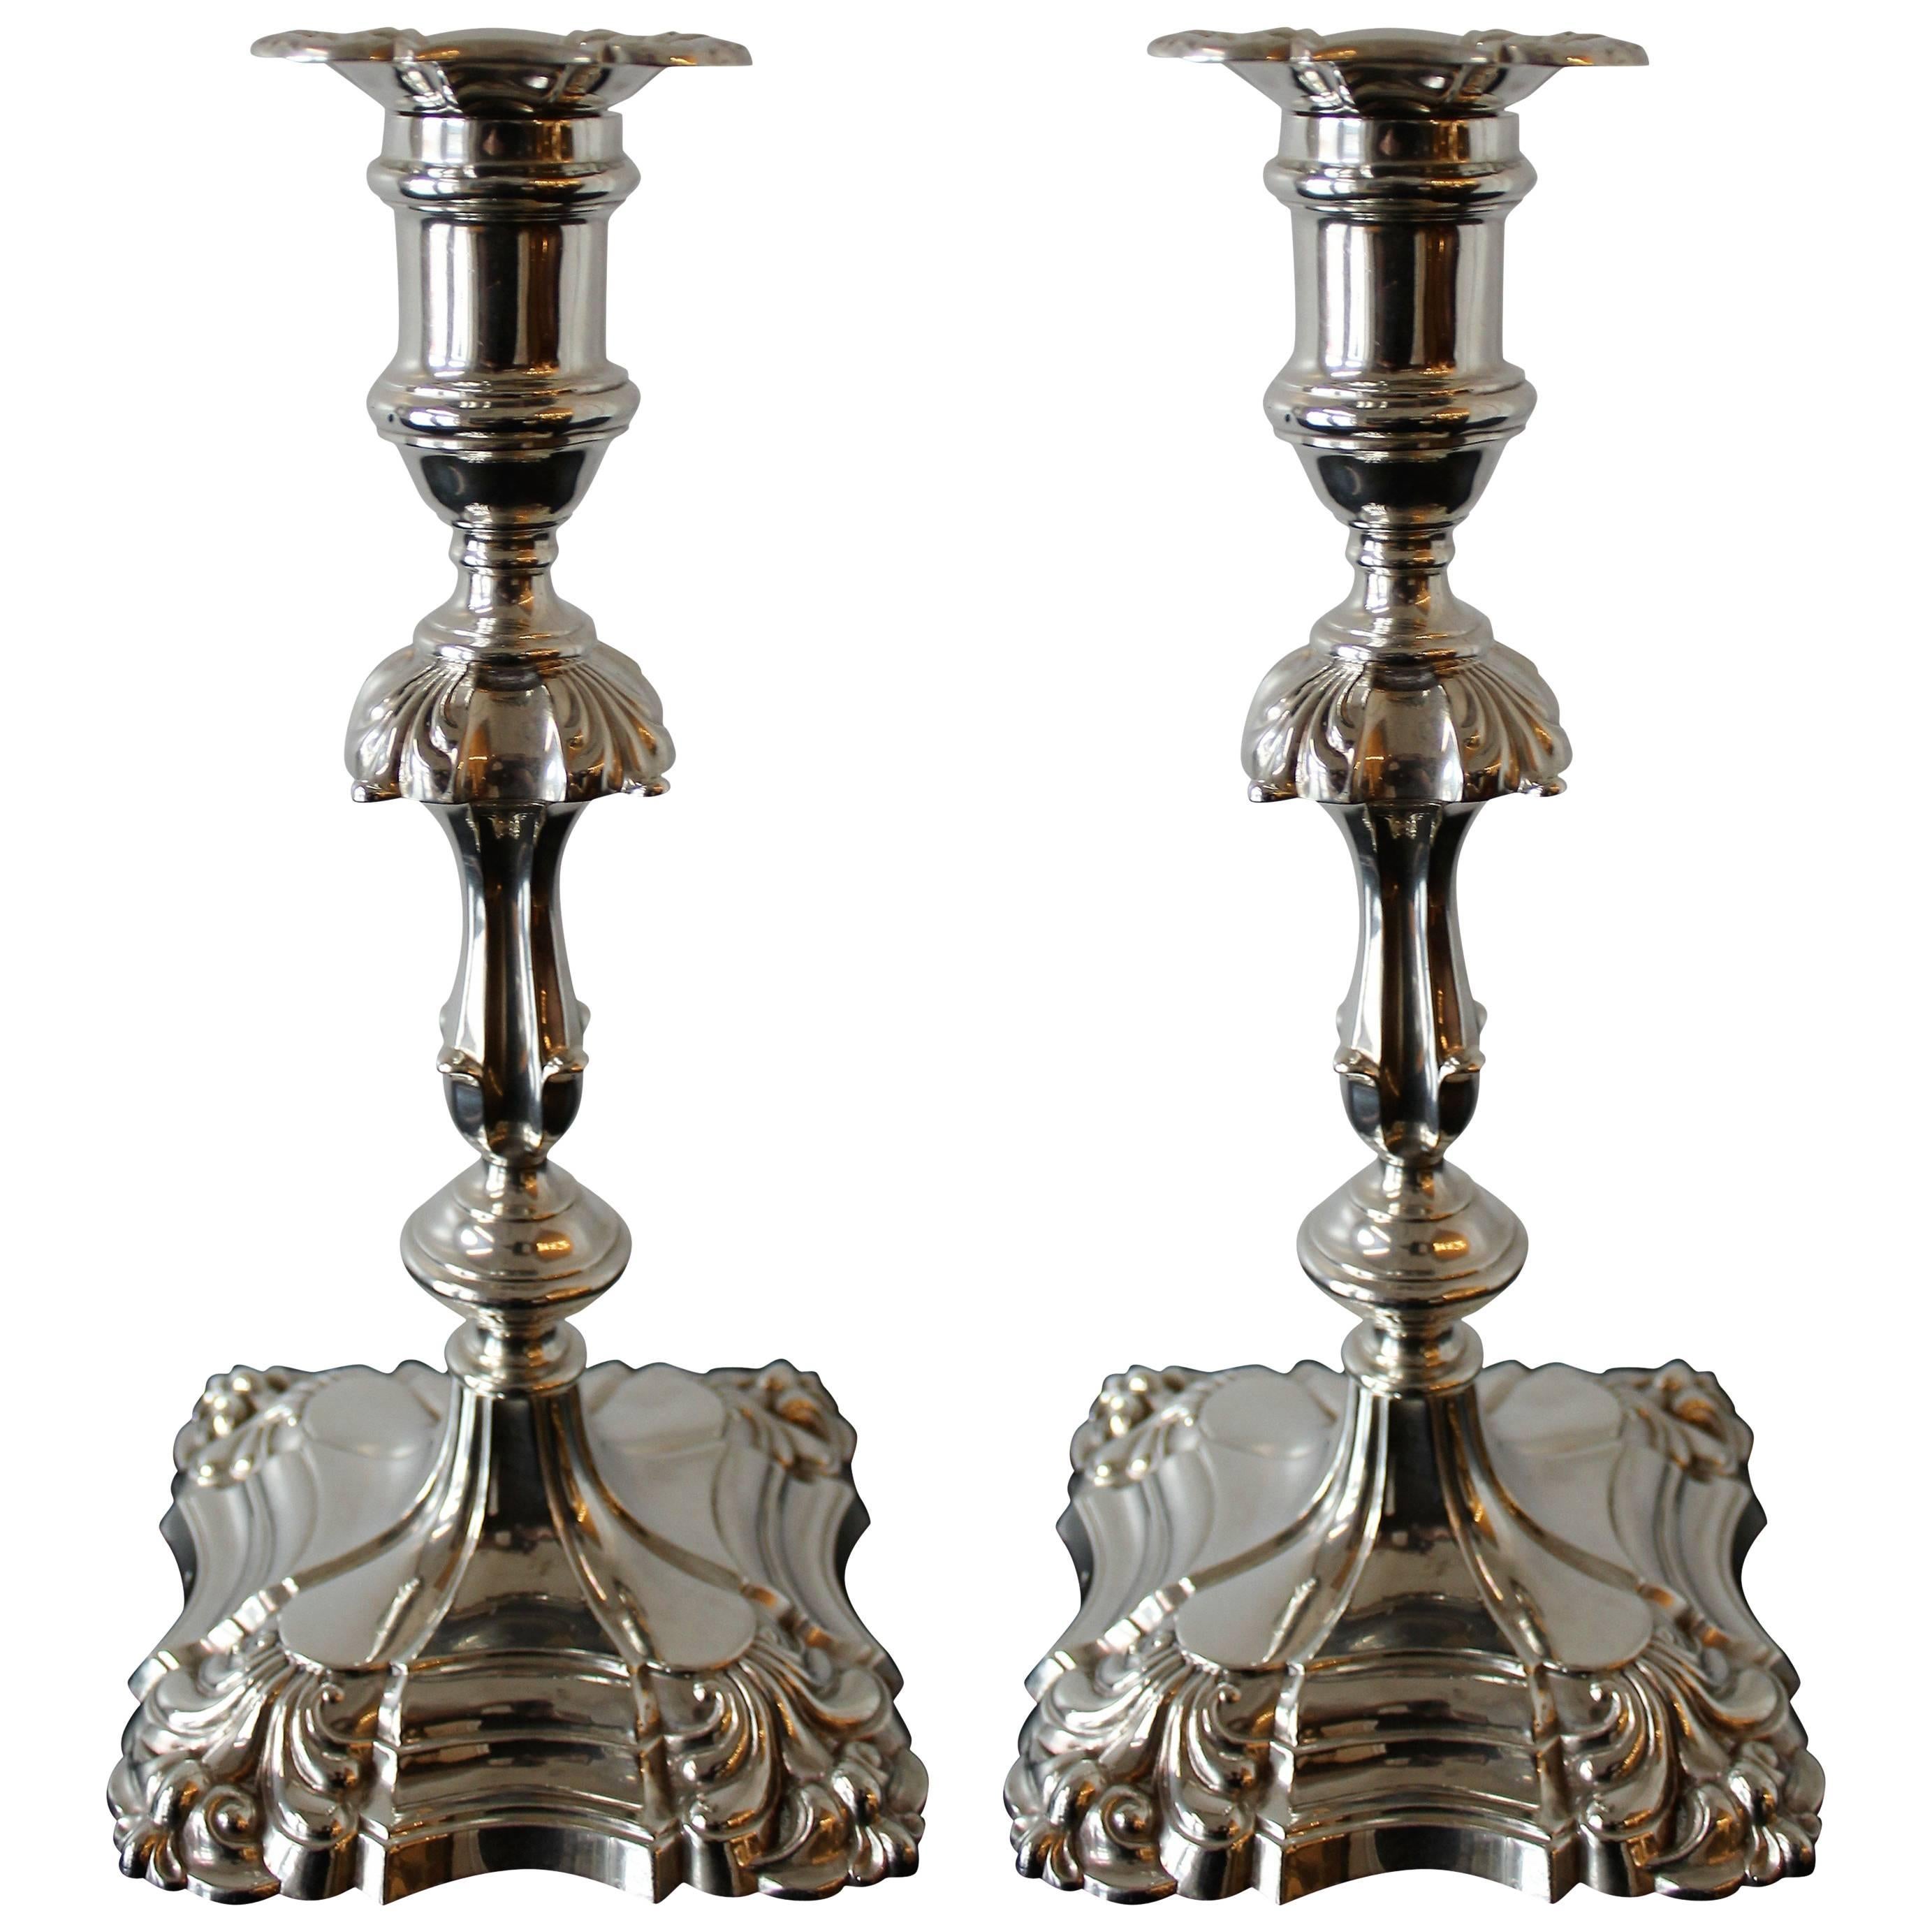 Pair of Edwardian English Sterling Silver Candlesticks by Hawksworth, Eyre & Co.